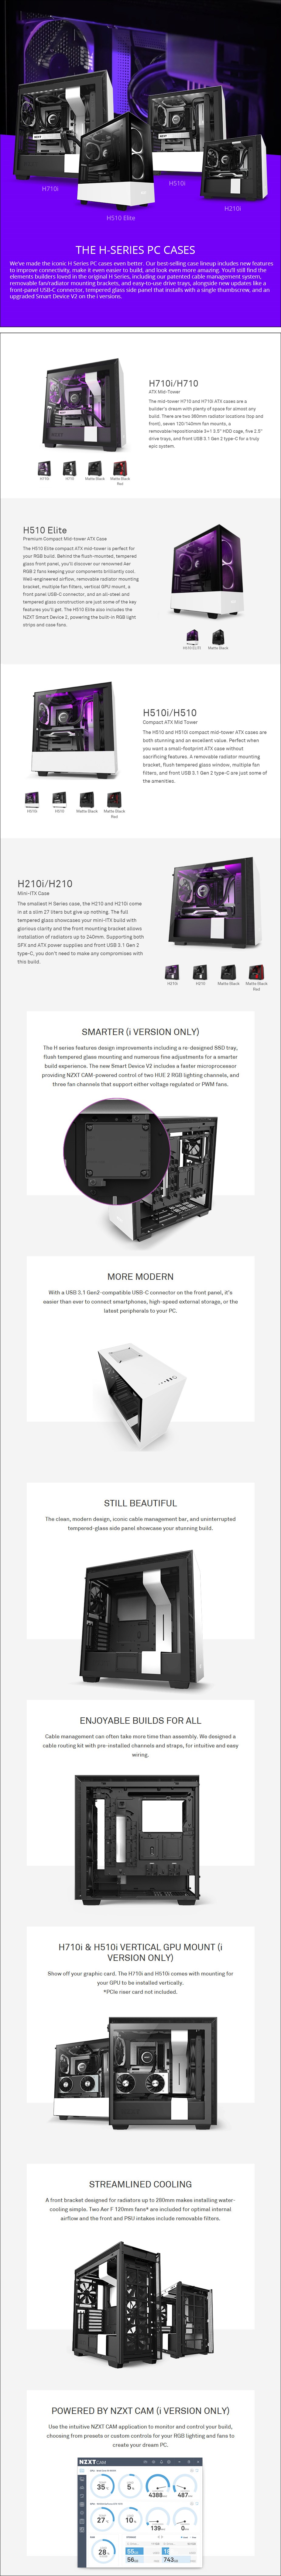 NZXT H510 Elite Tempered Glass Mid-Tower E-ATX Case - Overview 1